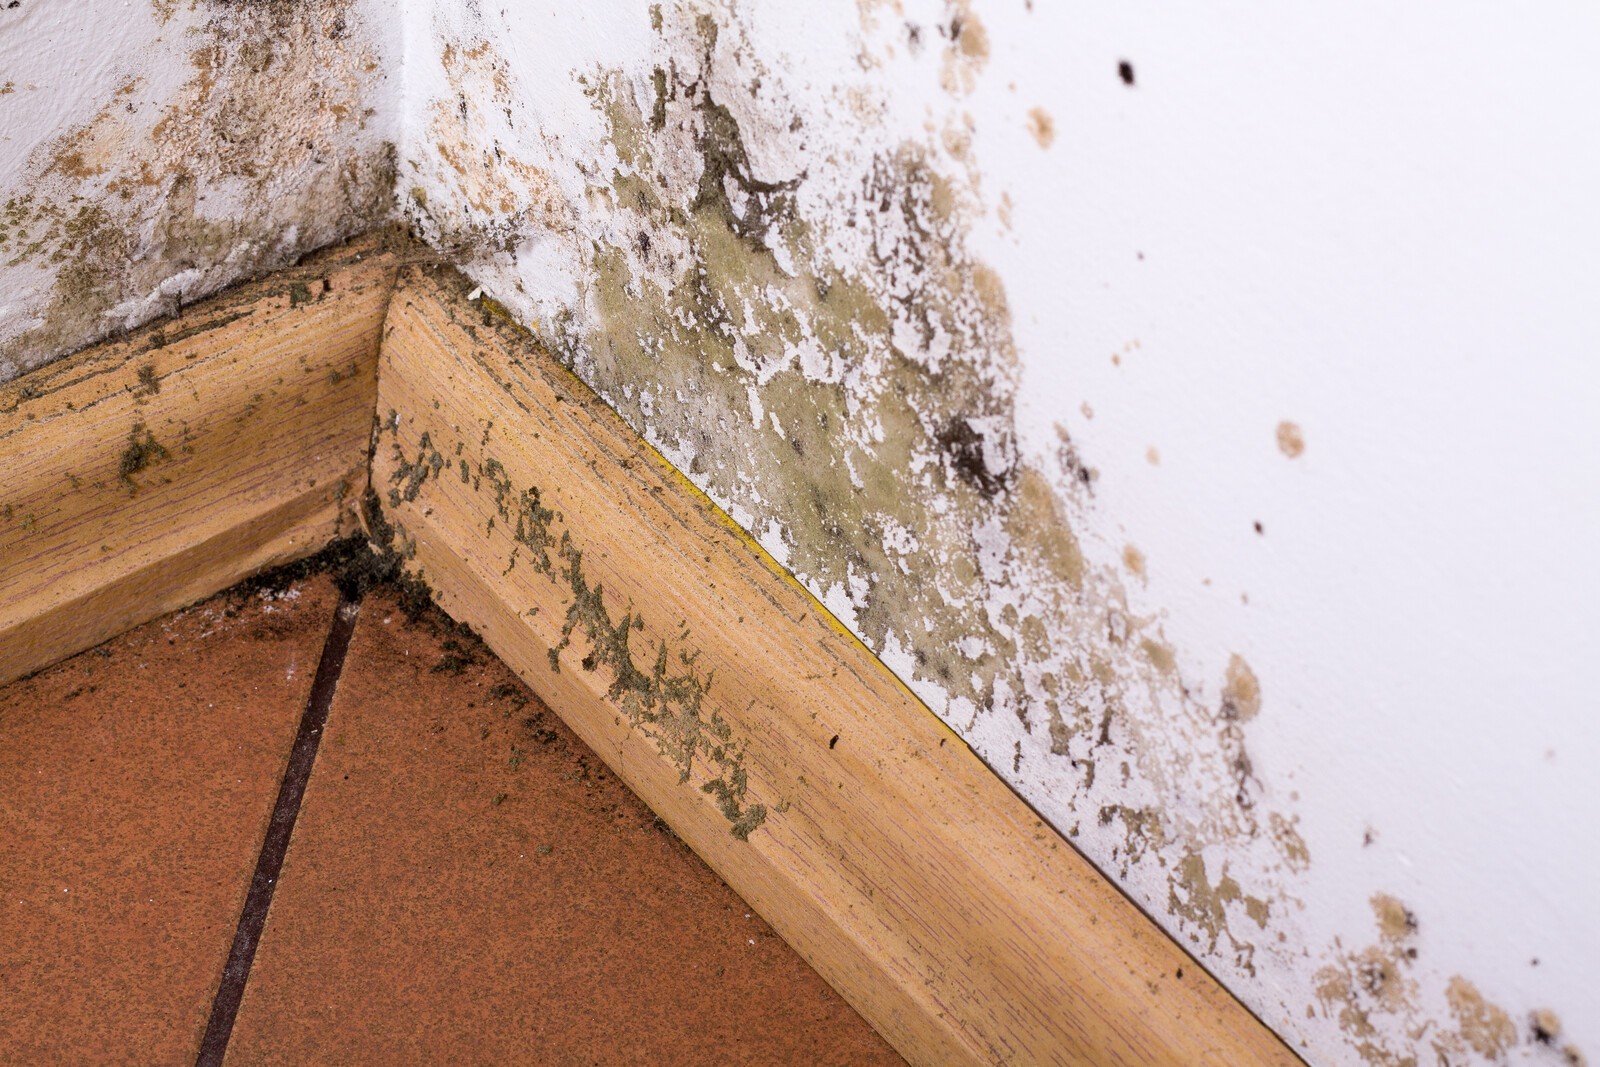 Mold and Mildew in Basement? Prevention and Remediation